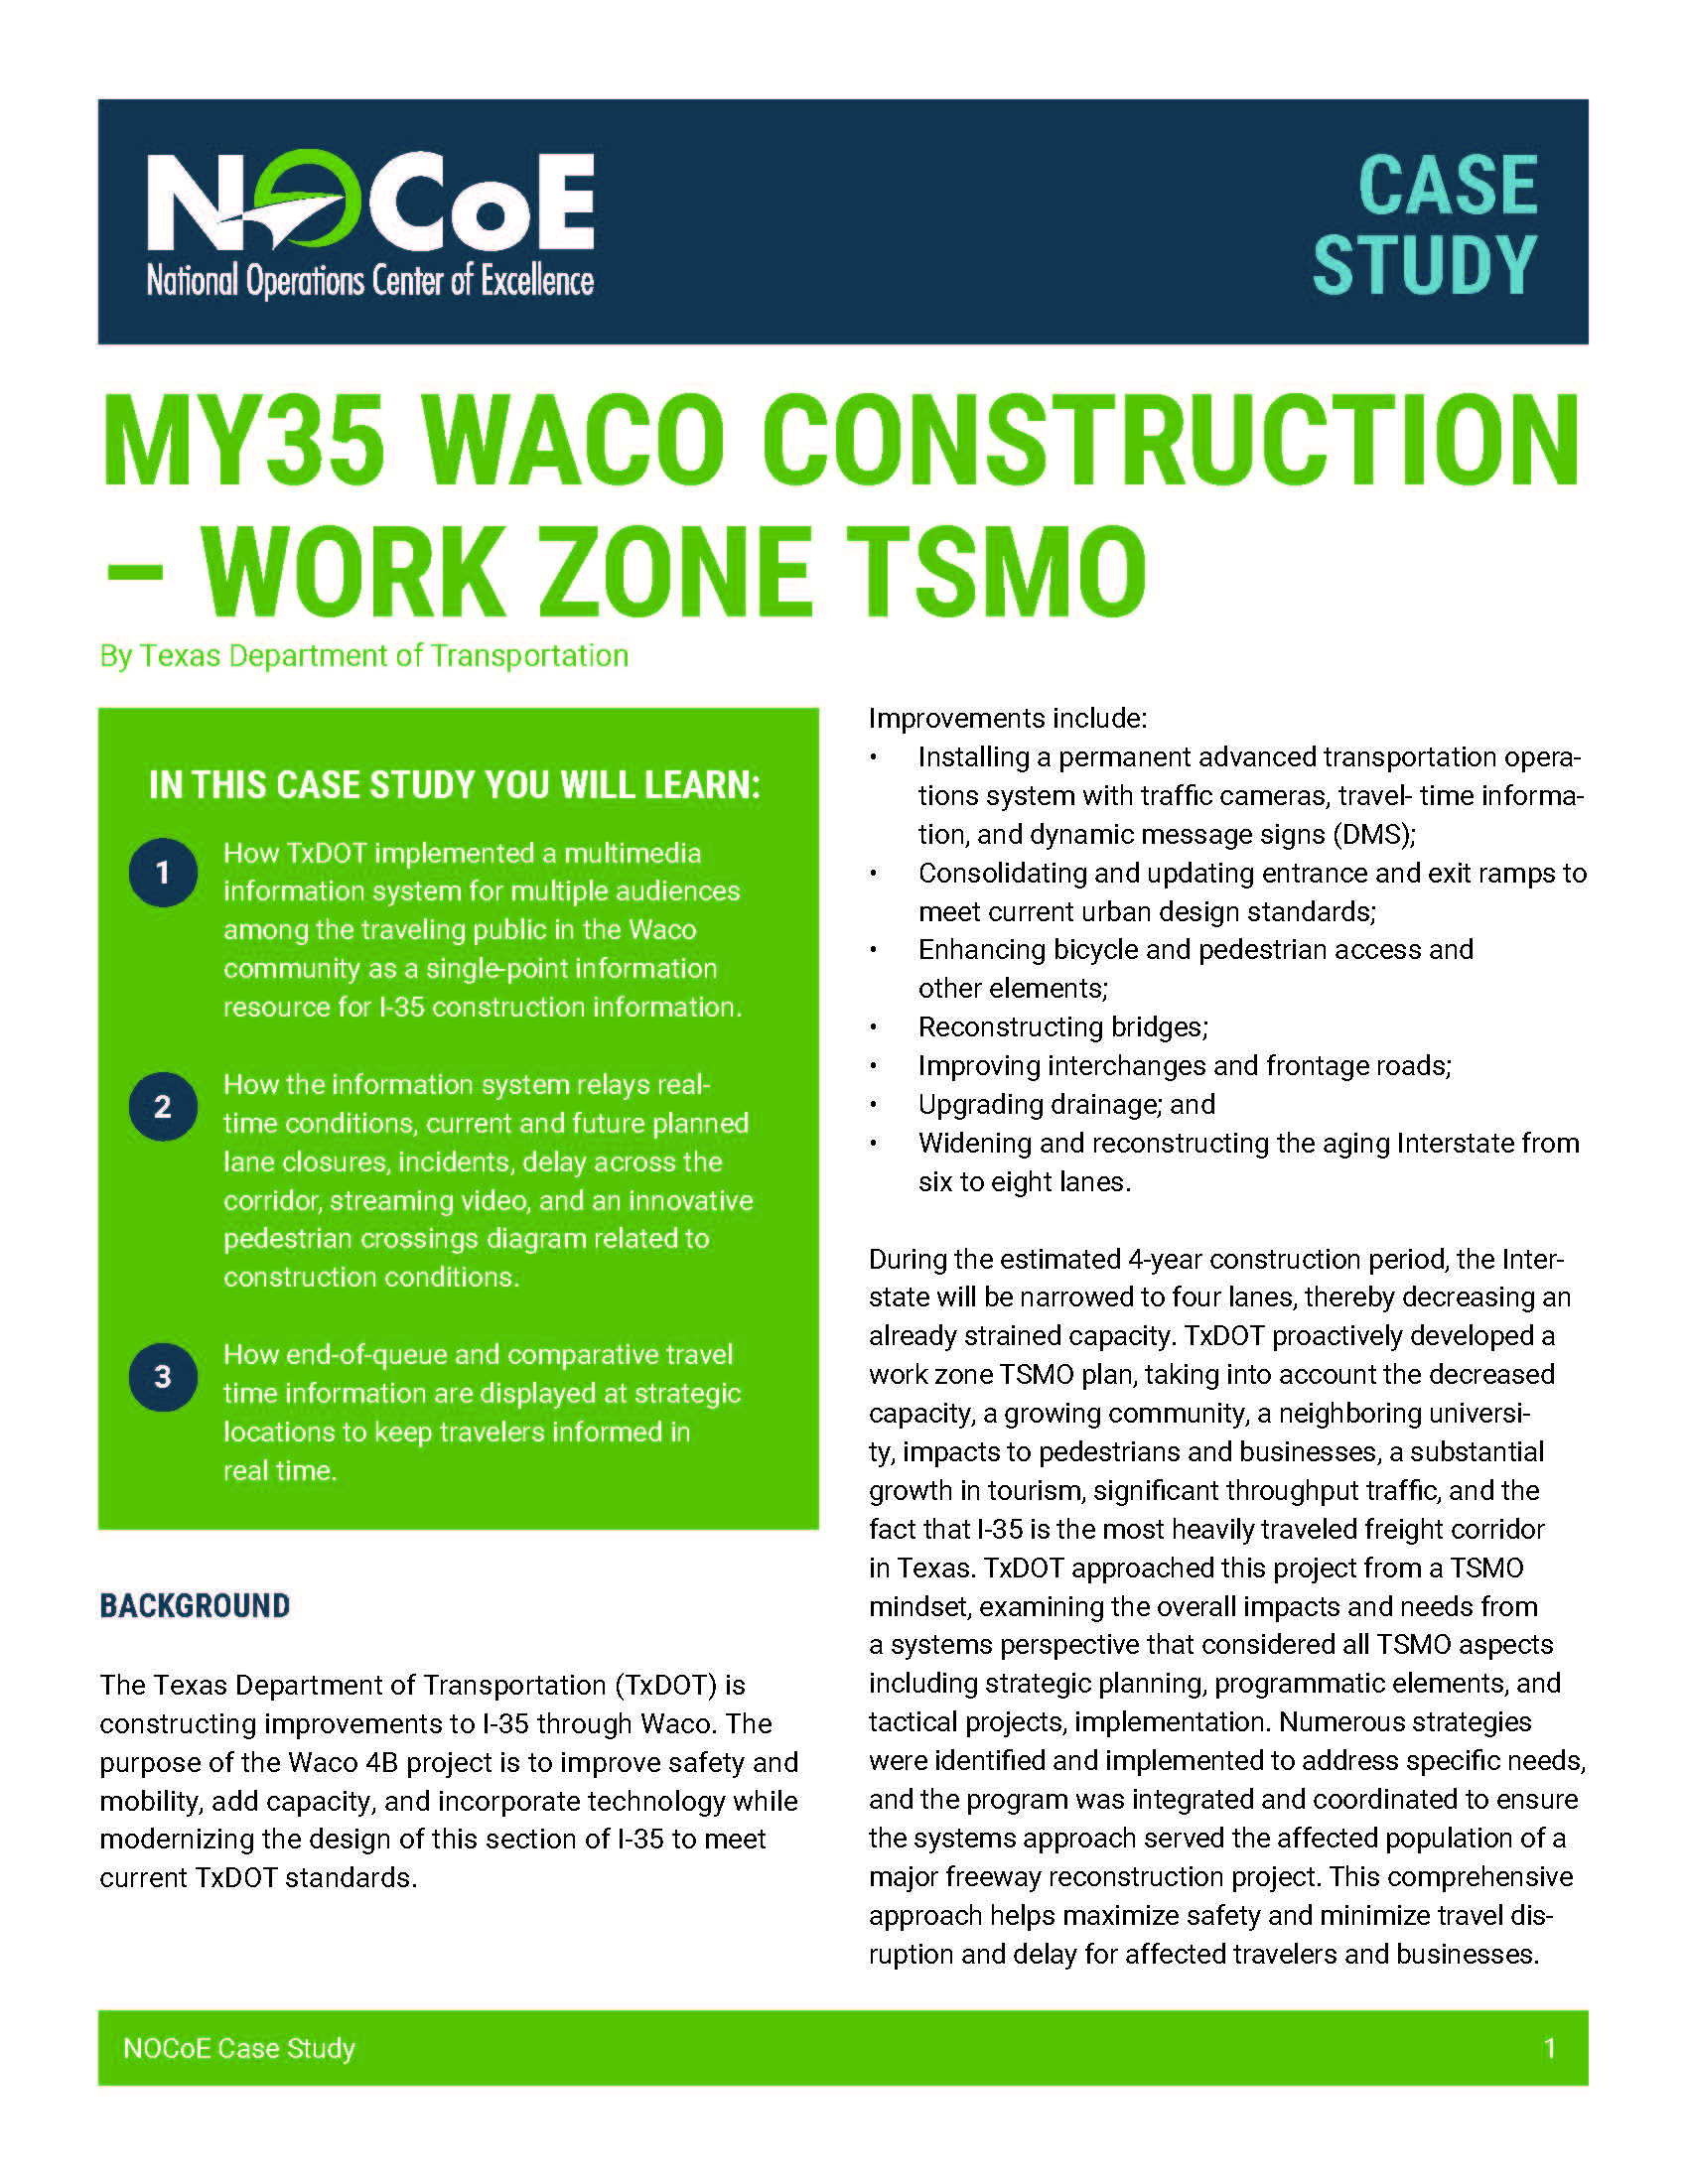 Cover page of the NOCoE My35 Waco Project Case Study